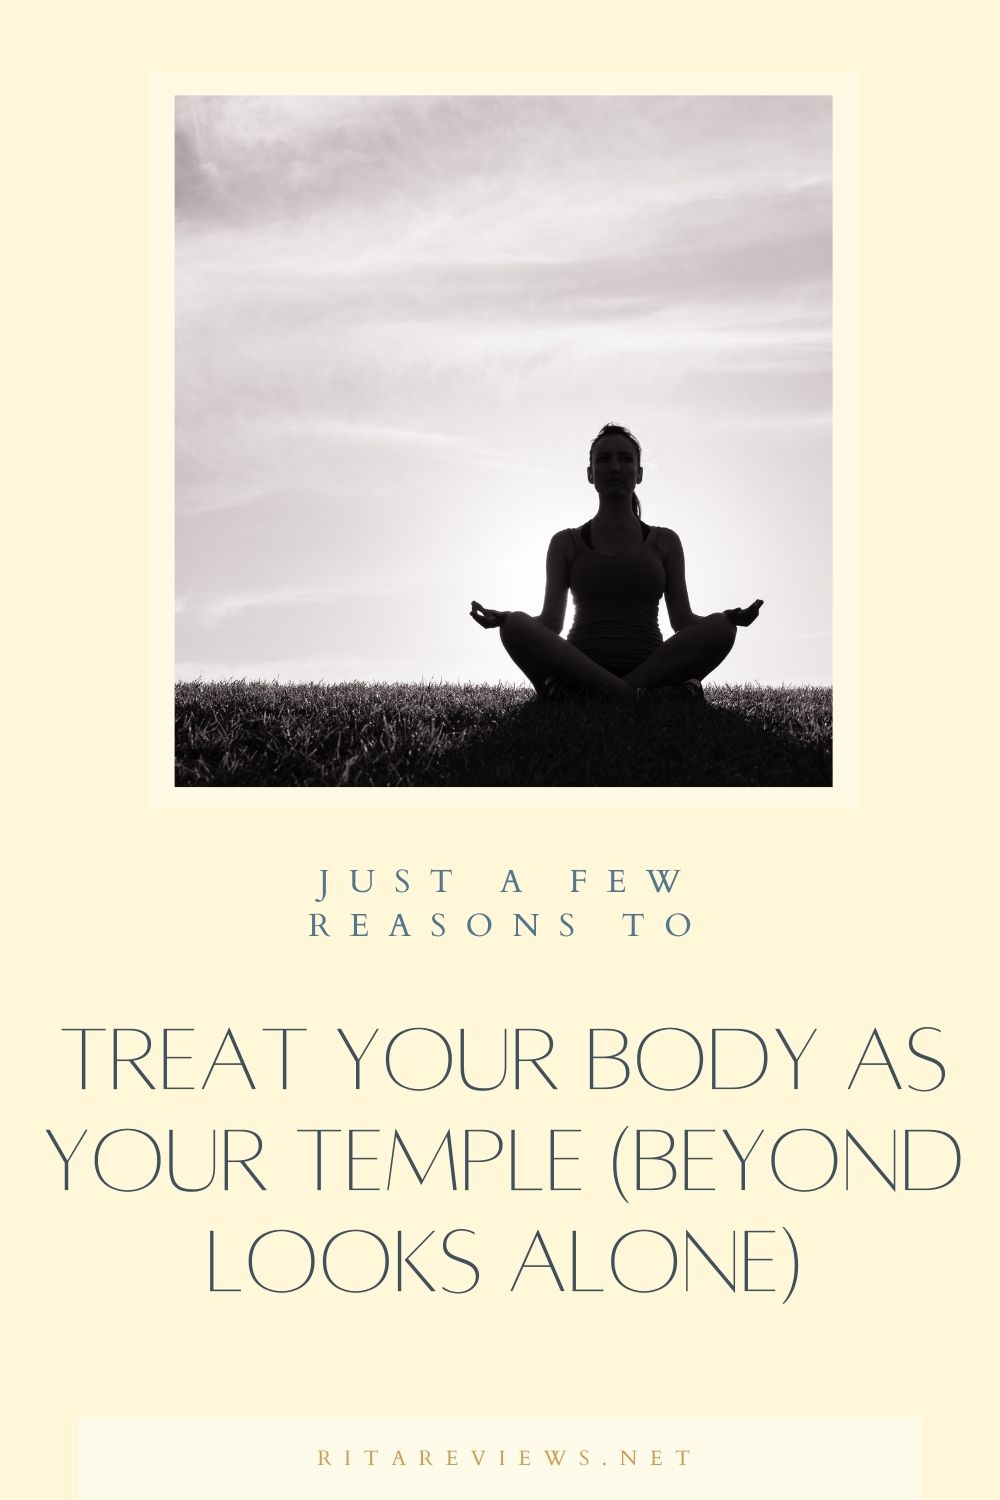 Just A Few Reasons to Treat Your Body As Your Temple Beyond Looks Alone